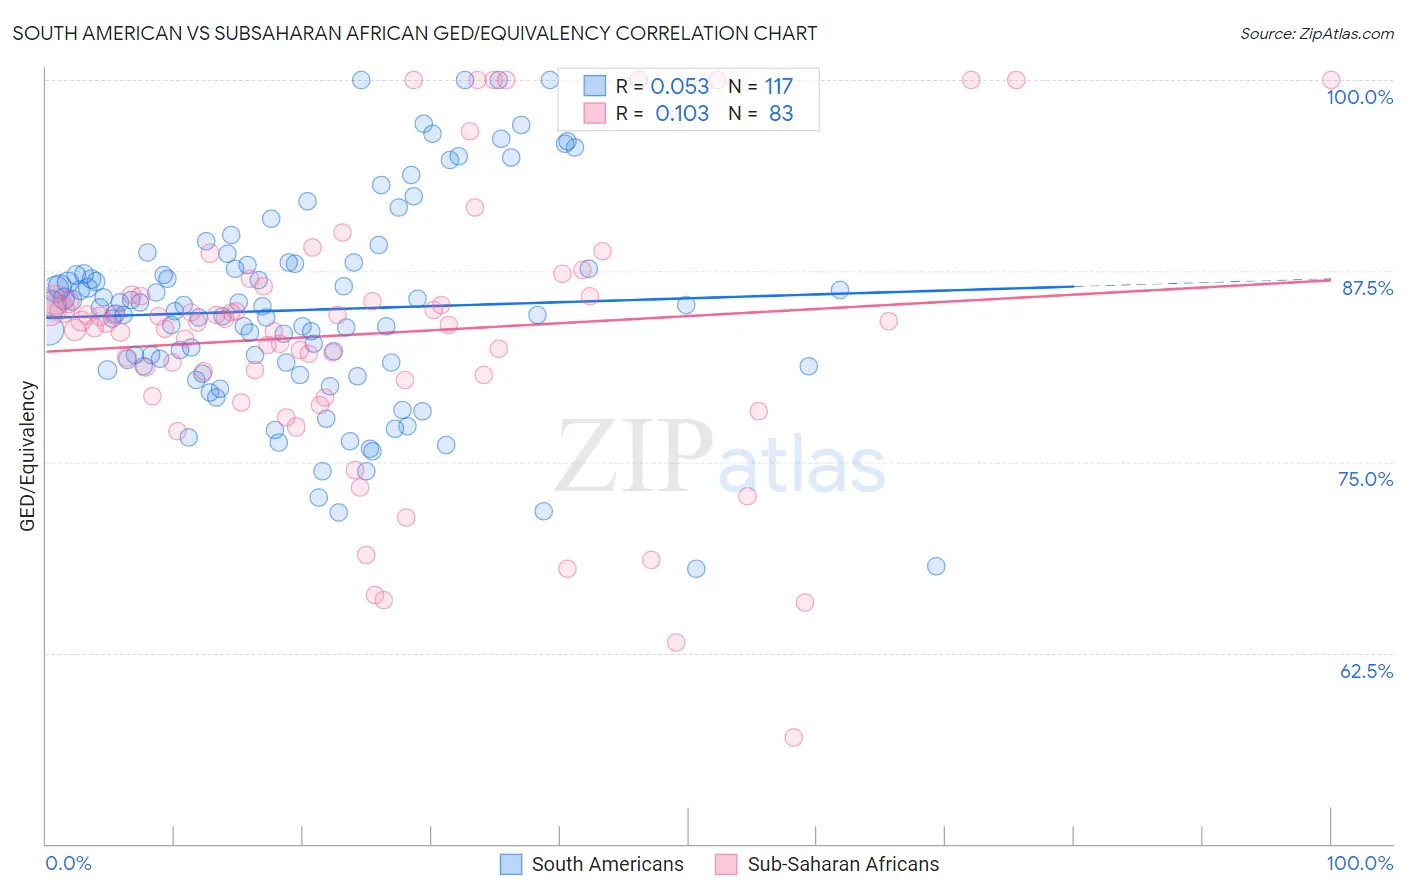 South American vs Subsaharan African GED/Equivalency